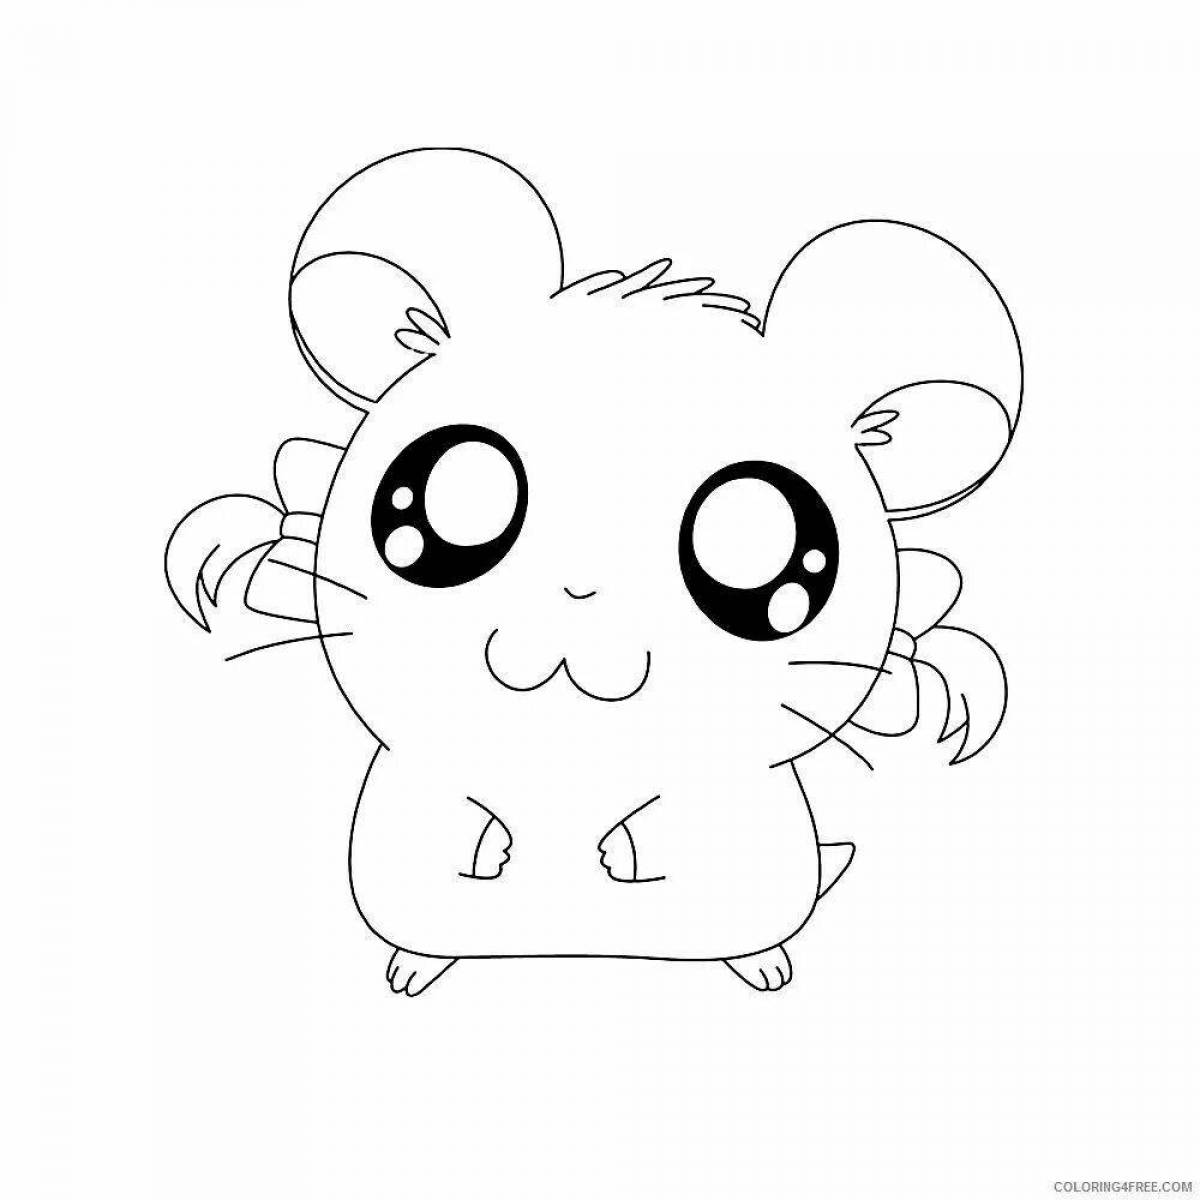 Sweet hamster coloring pages